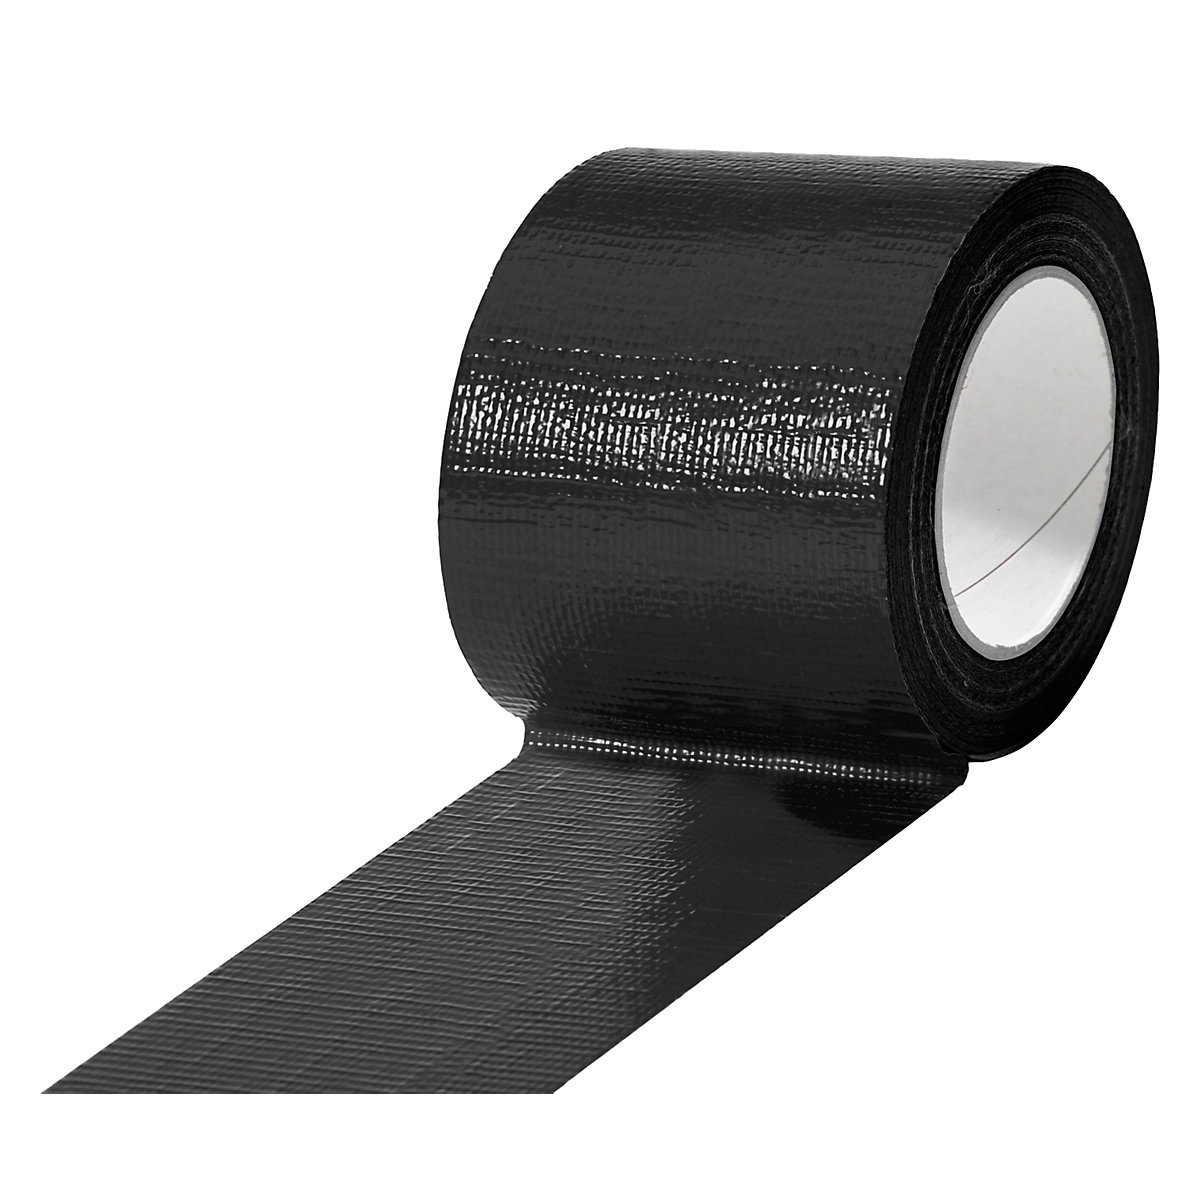 Fabric tape, in different colours, pack of 12 rolls, black, tape width 75 mm-8